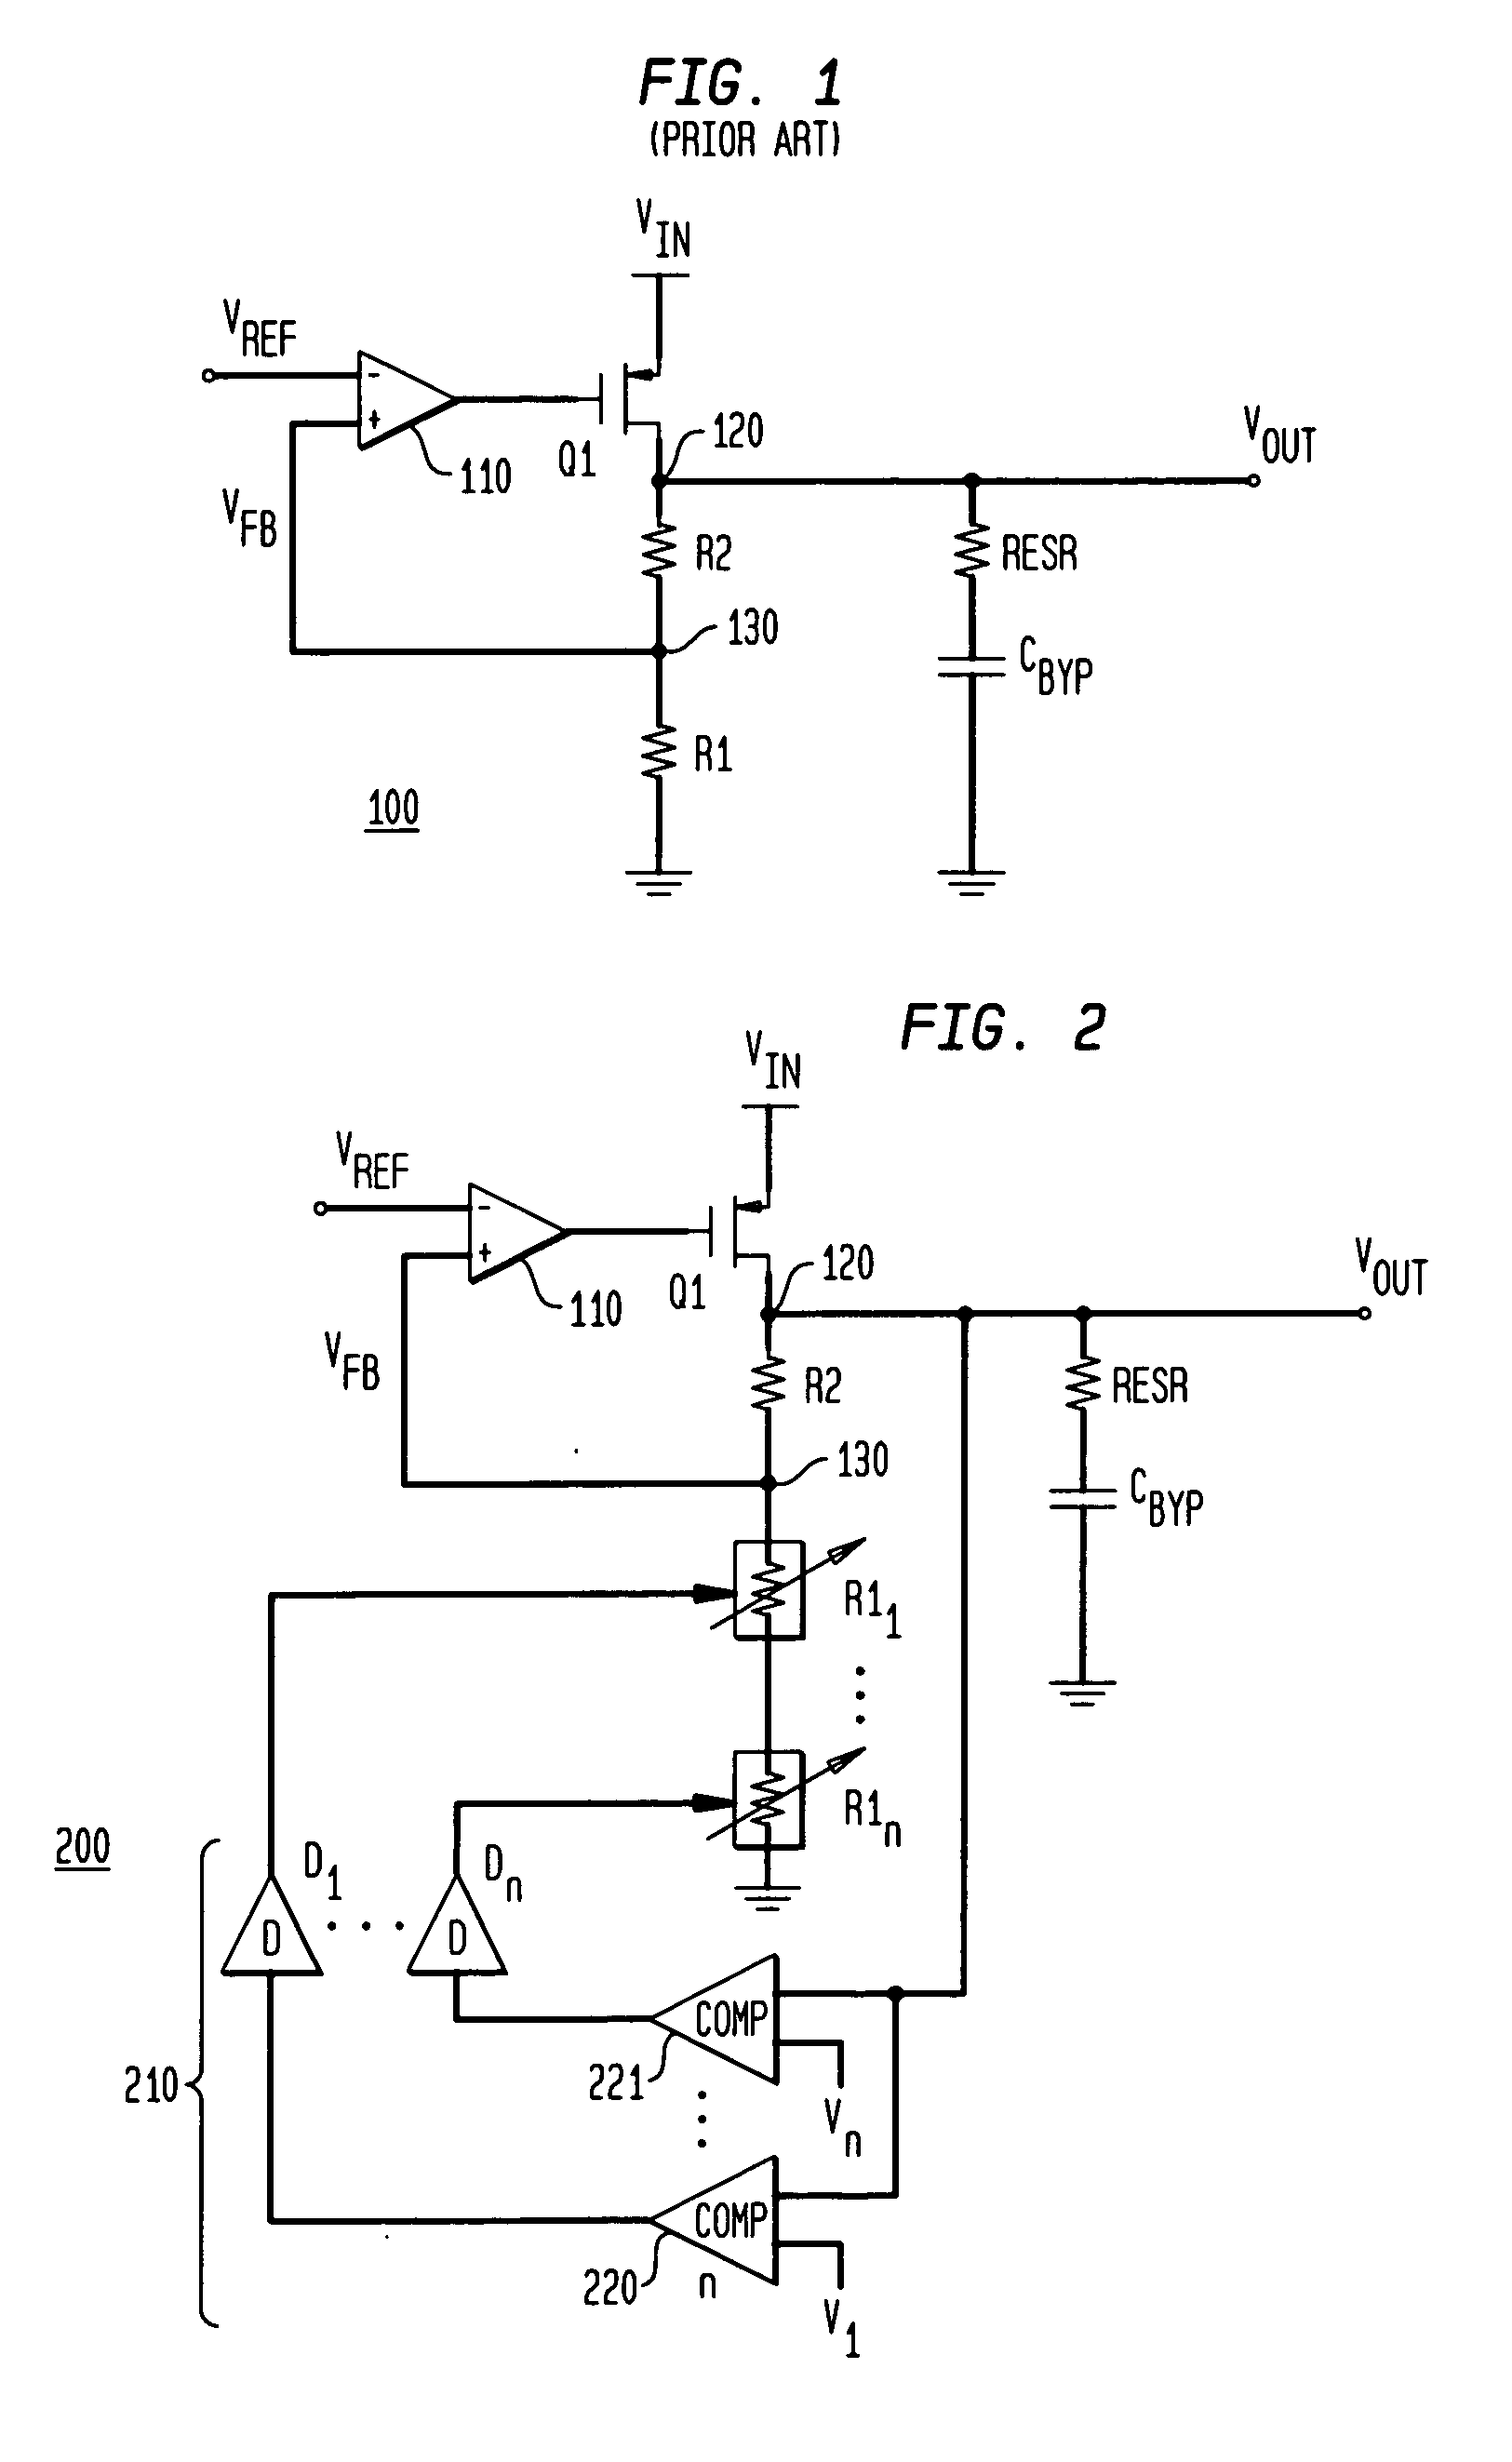 Low-dropout regulator with startup overshoot control